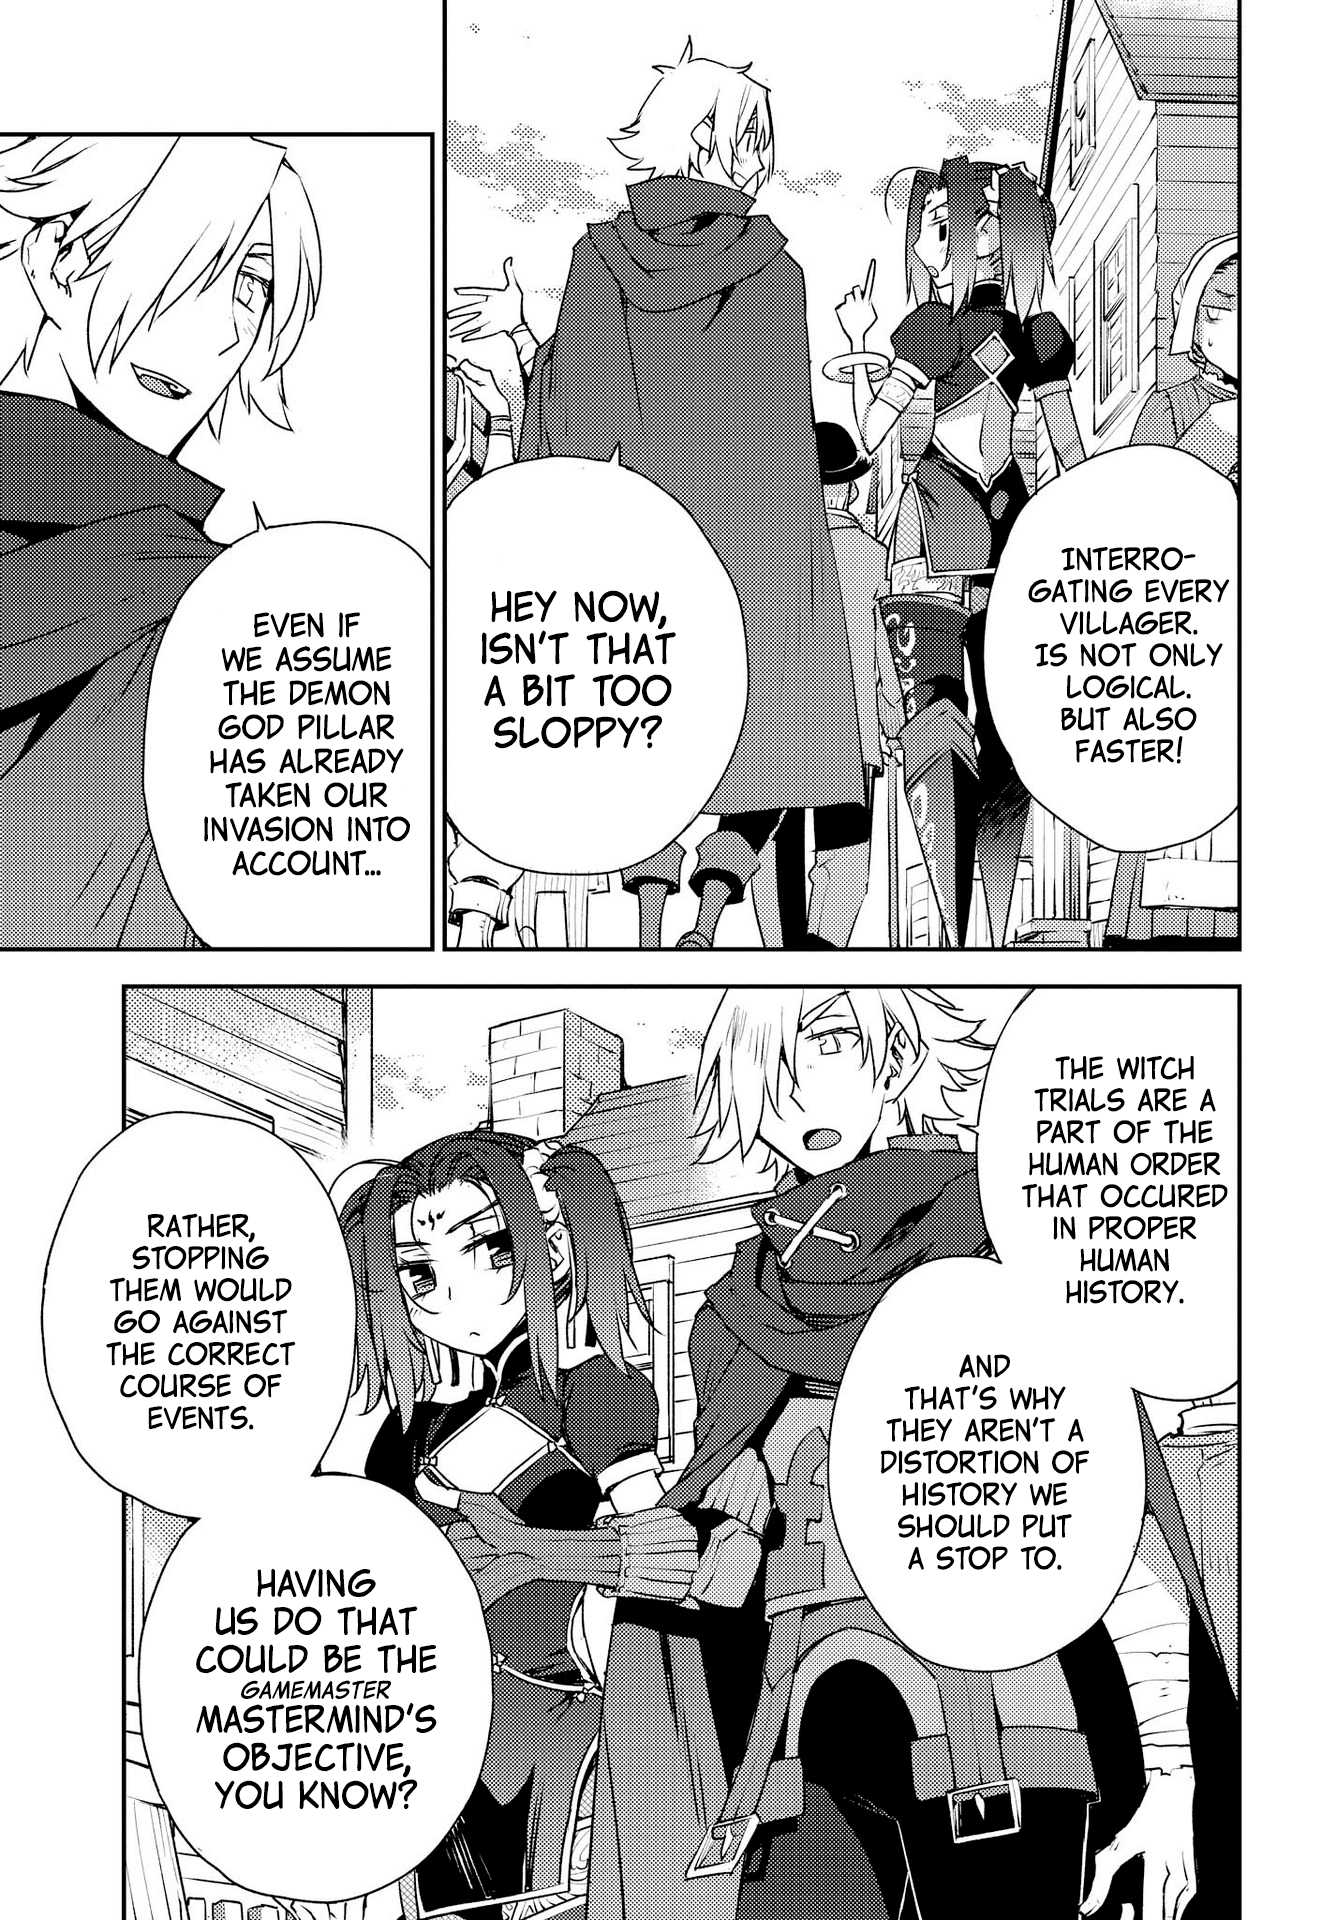 Fate/grand Order: Epic Of Remnant - Subspecies Singularity Iv: Taboo Advent Salem: Salem Of Heresy - 5 page 3